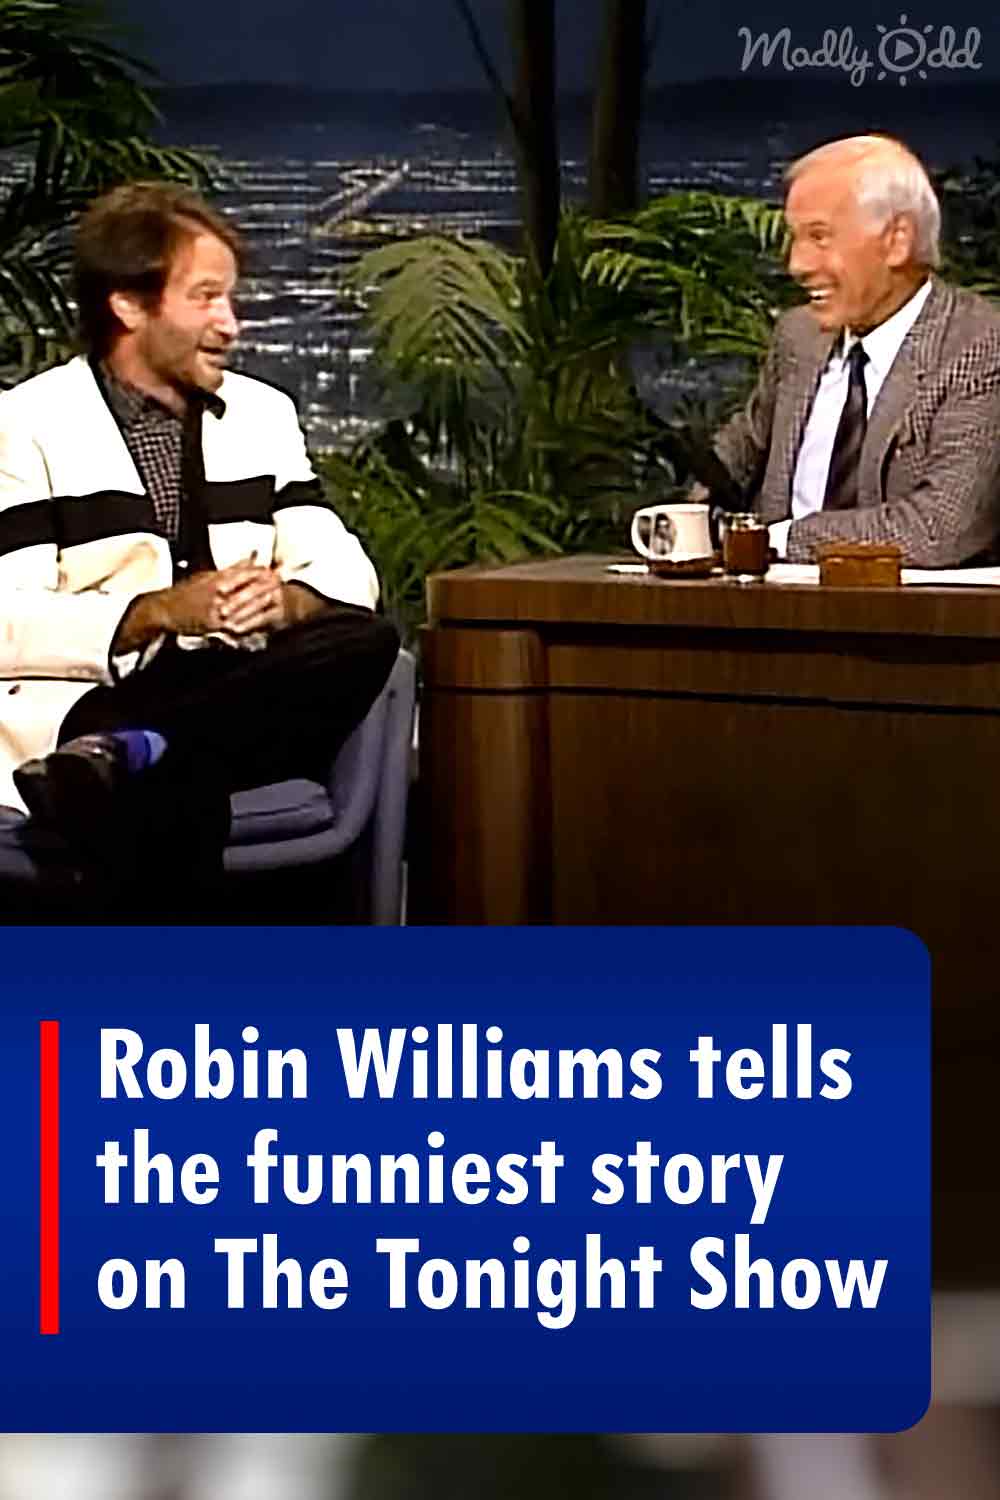 Robin Williams tells the funniest story on The Tonight Show